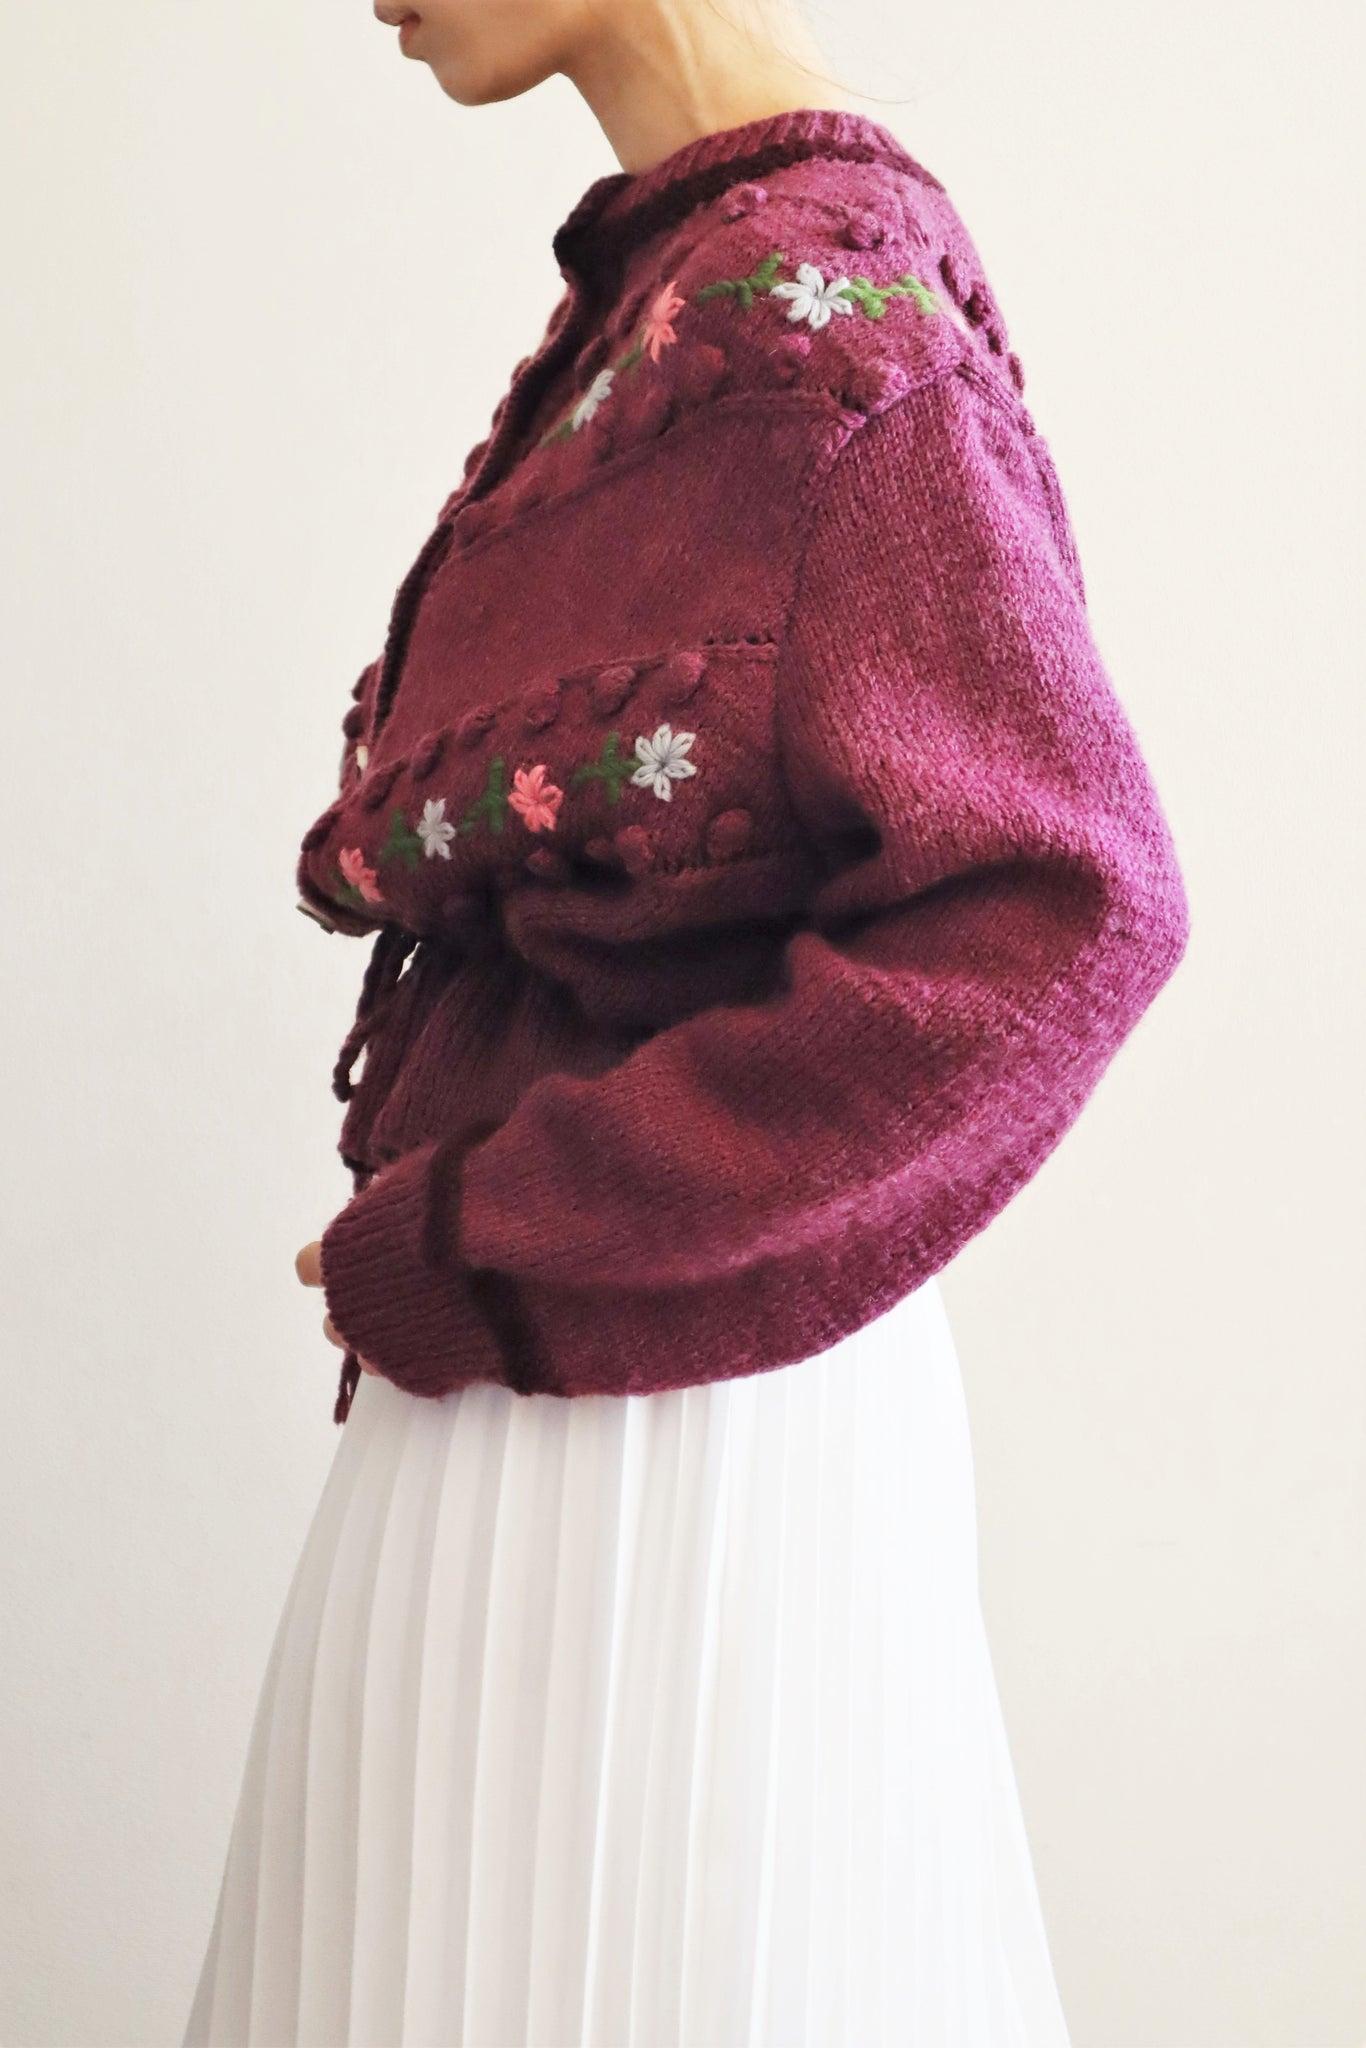 80s Austrian Hand Knit Pon Pon Wool Cardigan Flower Embroidered